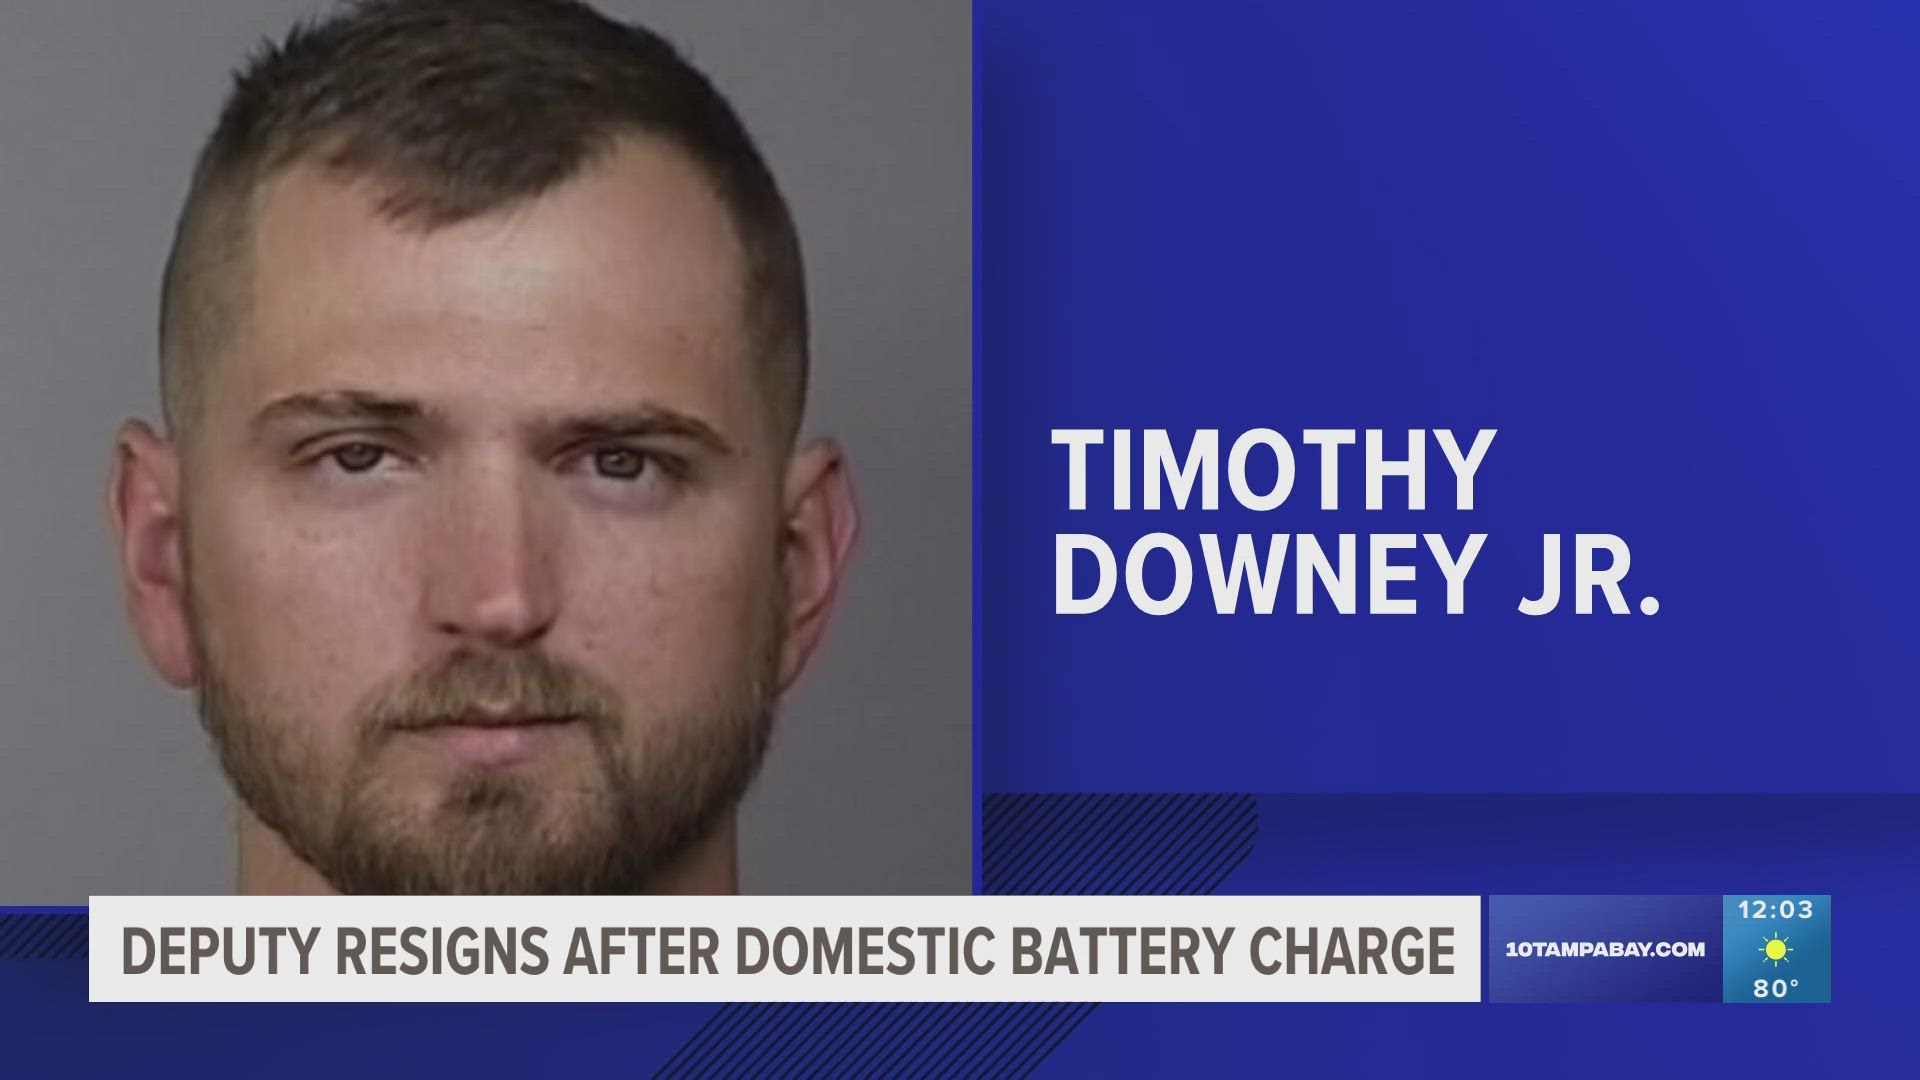 The sheriff's office said Timothy Downey, Jr. put his hands on a woman after she asked him not to.